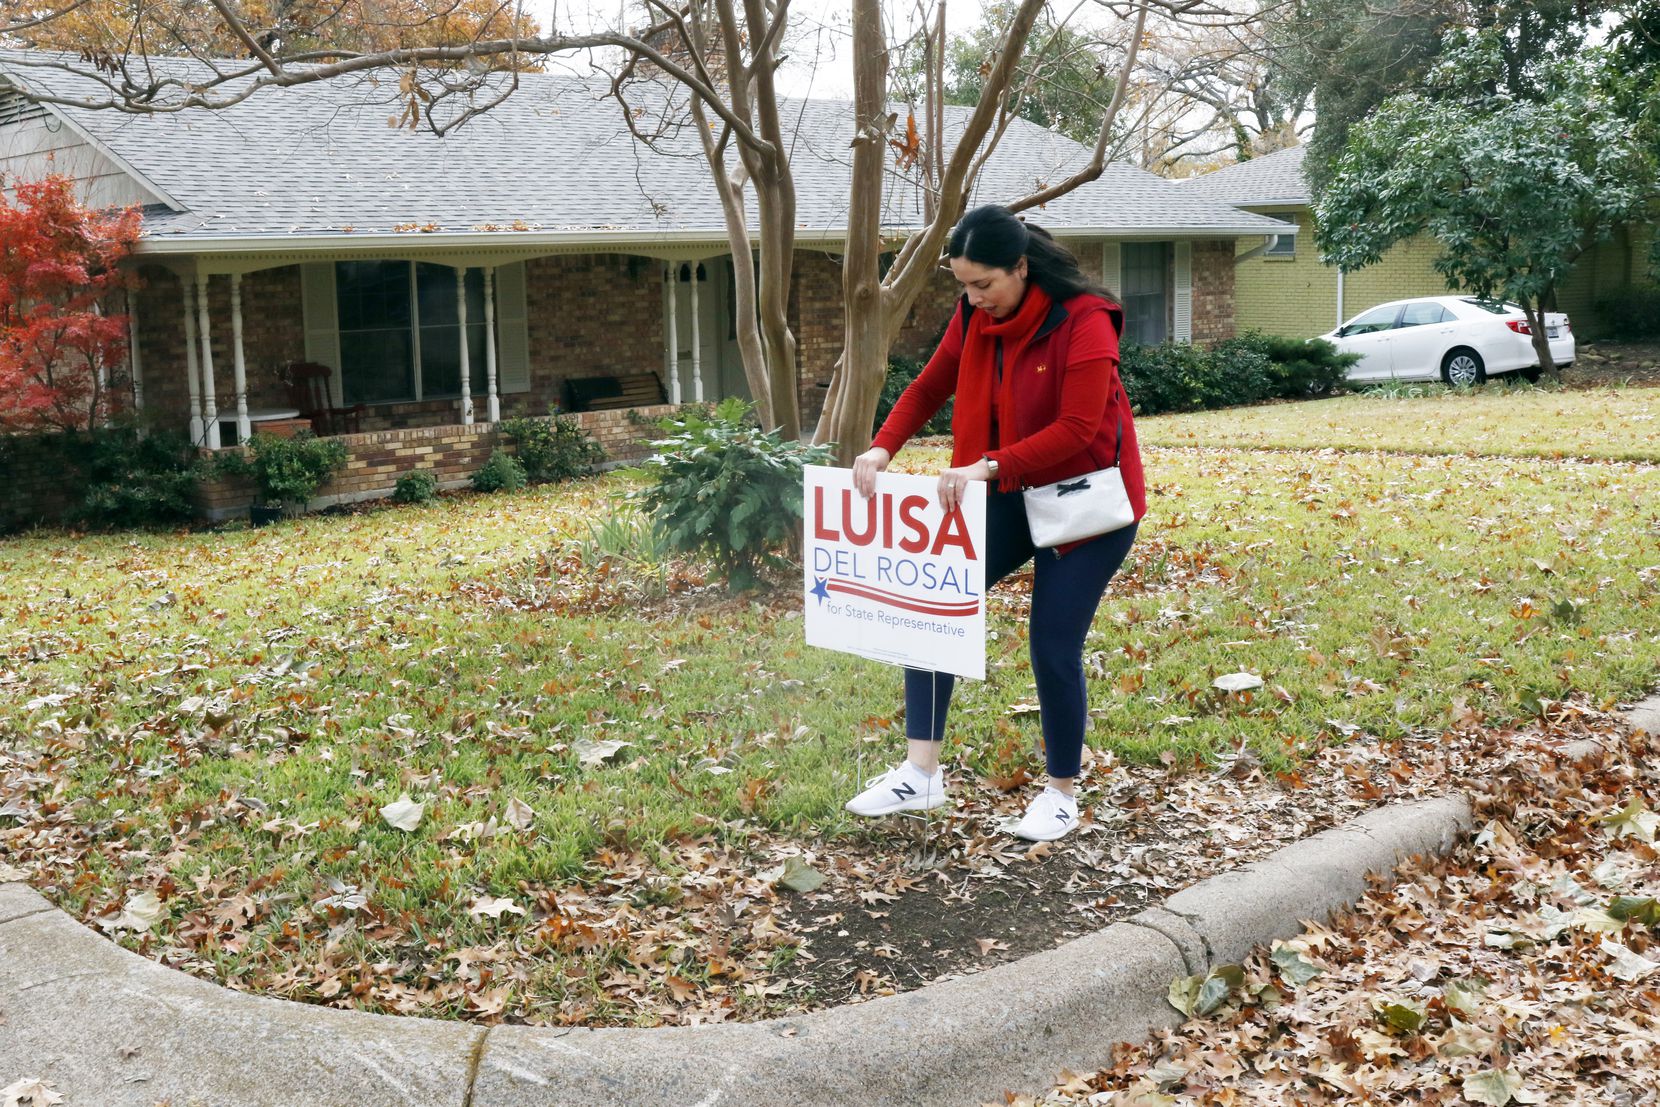 Luisa Del Rosal puts her campaign sign on a supporter's front lawn. She and her campaign manager had a block walk in Texas House District 114 in Dallas on Nov. 23, 2019. Del Rosal is among the Republican candidates looking to take back House districts that Democrats flipped in 2018.